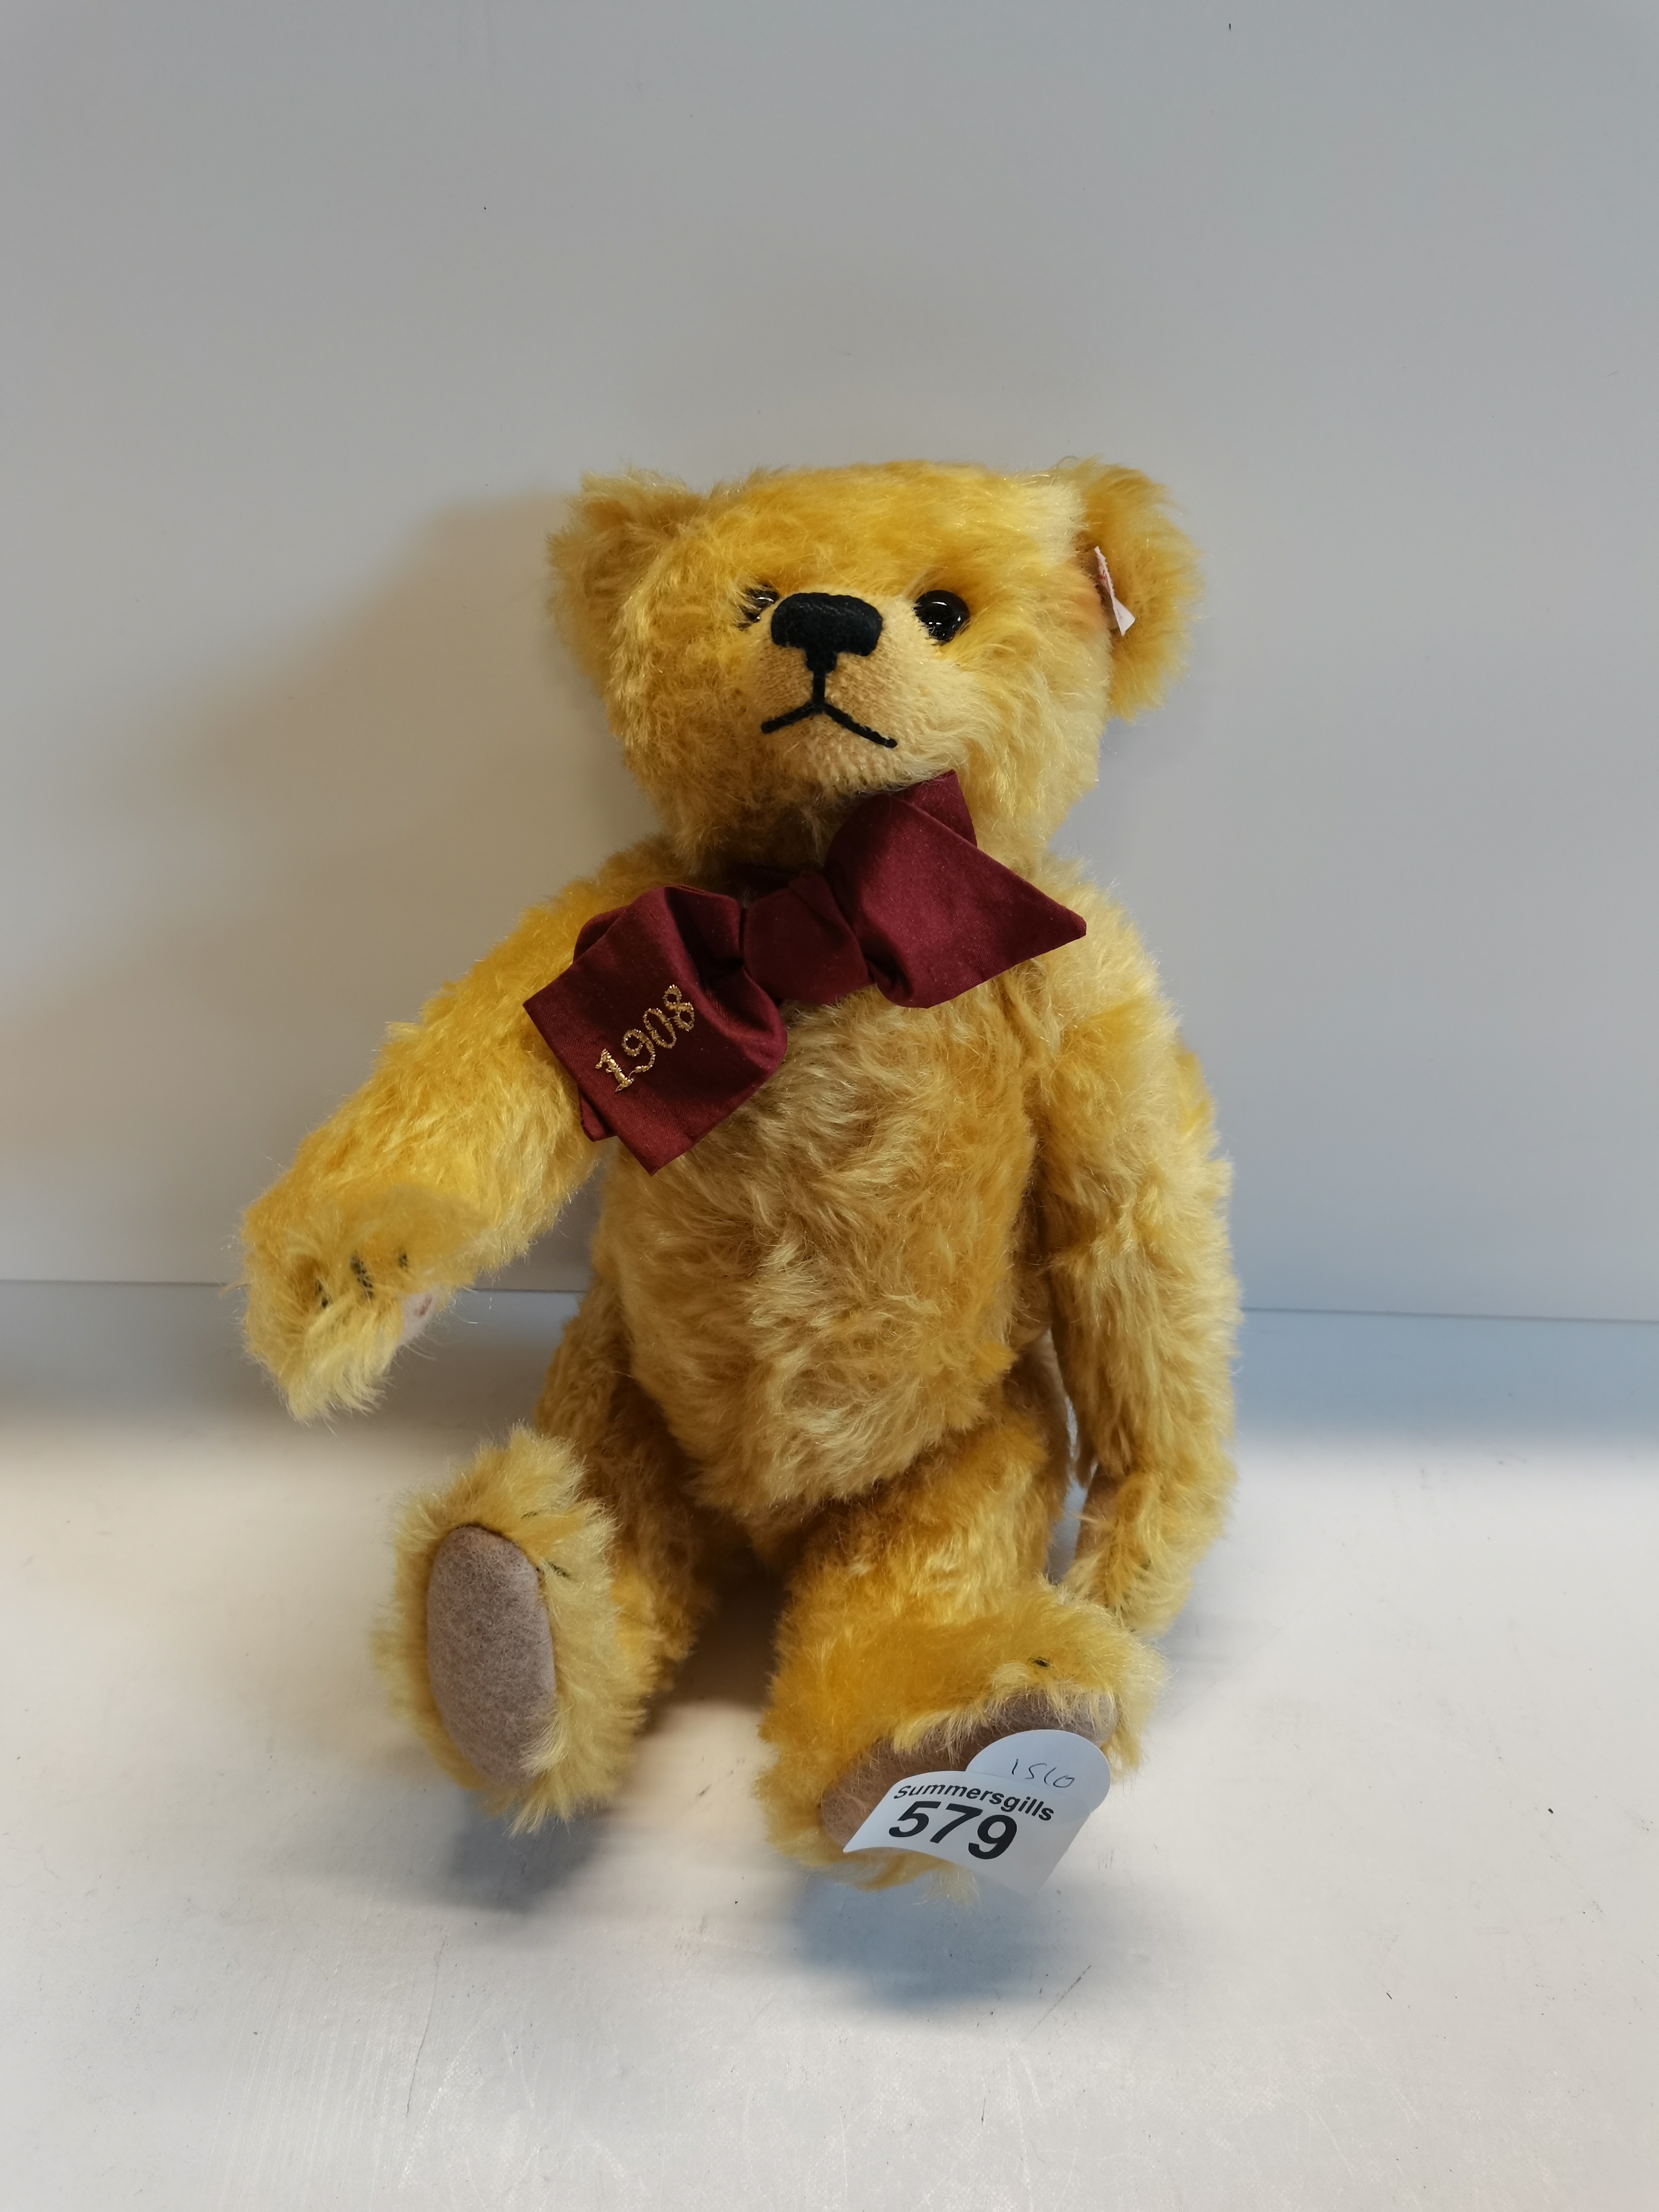 100 years Steiff Bear (Growler) - No 037207 - In box condition as new